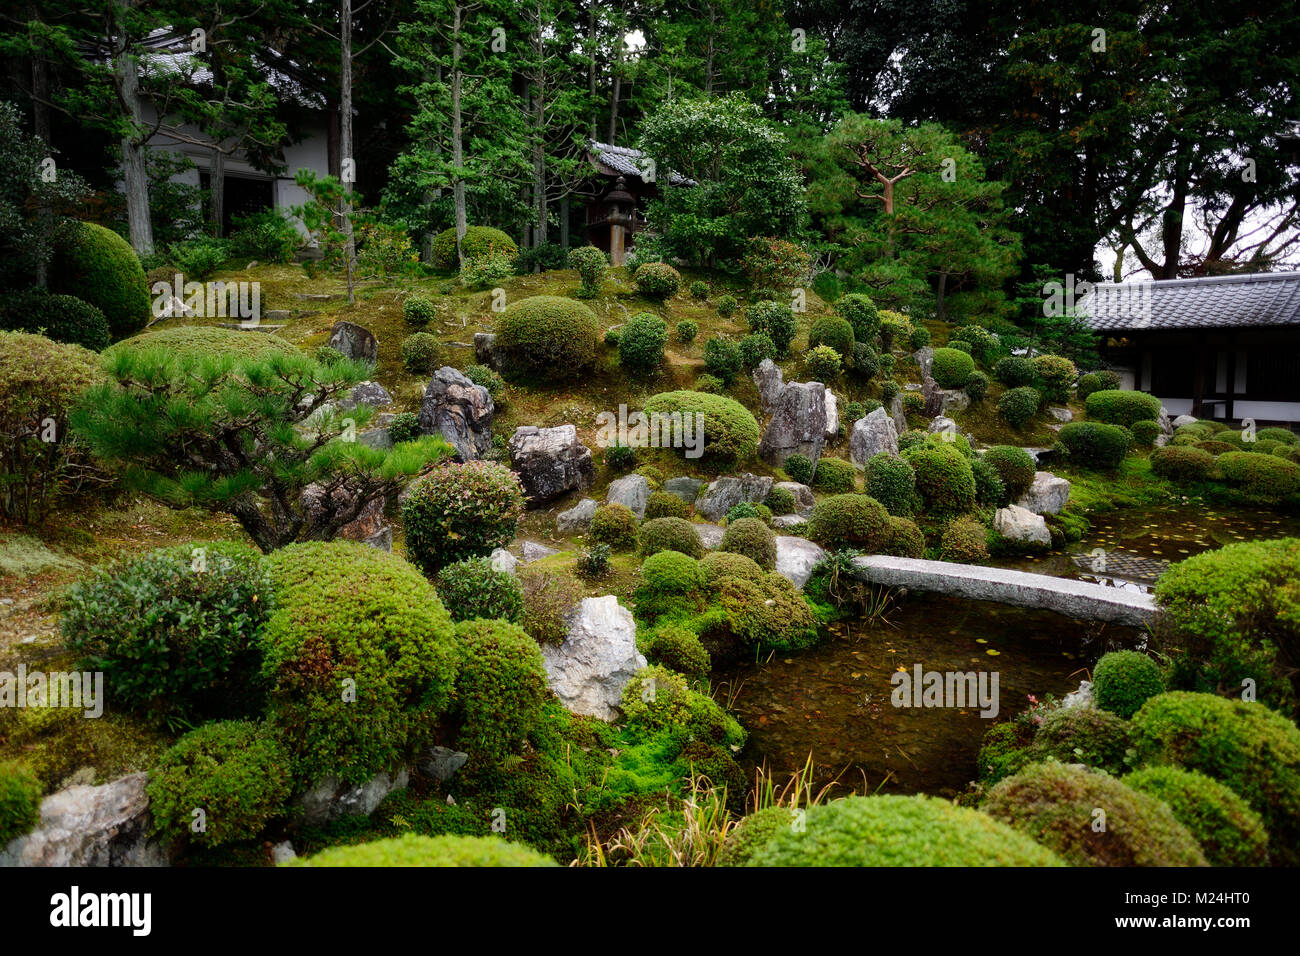 License available at MaximImages.com Traditional Japanese garden with a bridge over pond, pine trees and azaleas Tofuku-ji Buddhist temple Kyoto Japan Stock Photo